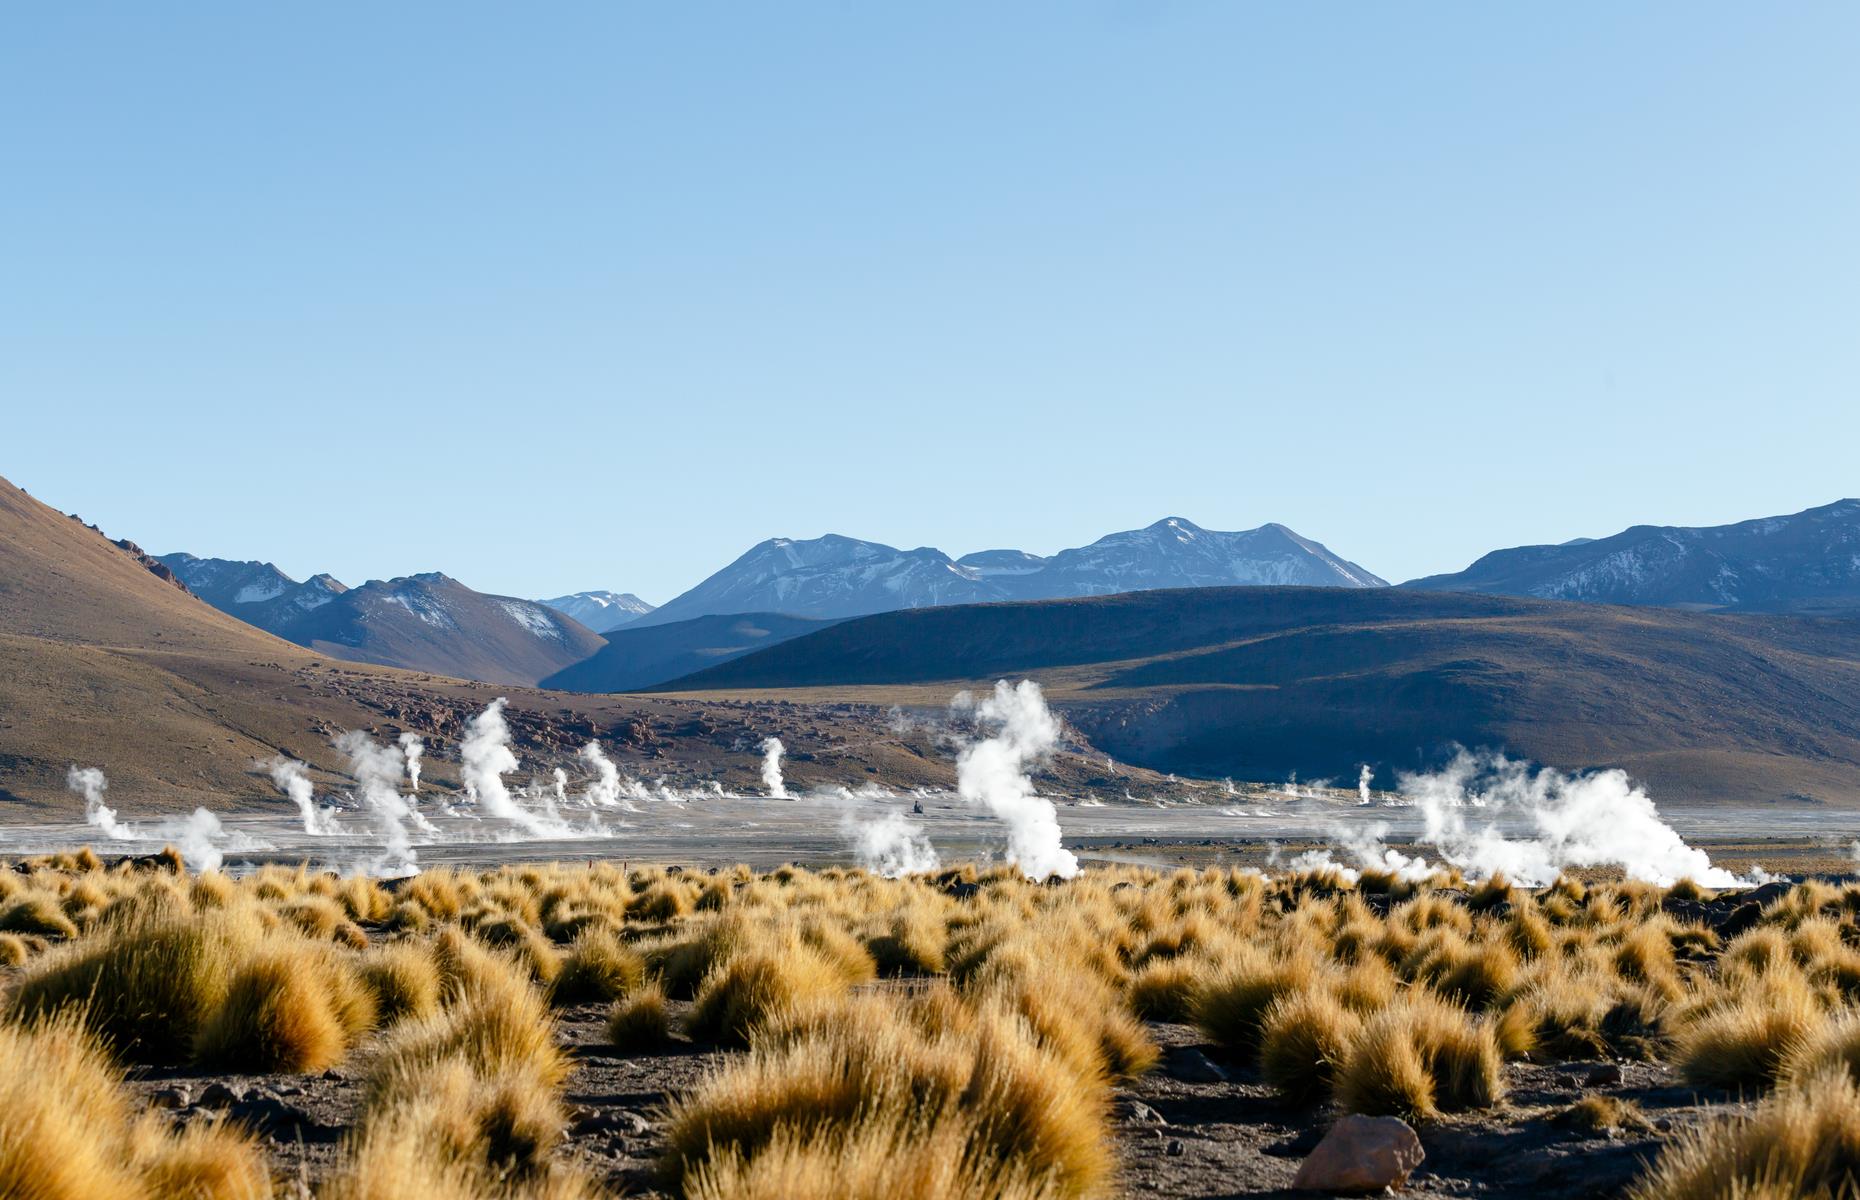 <p>At El Tatio, in Chile’s Altiplano region, powerful shots of steam jet out from geysers (for obvious reasons, no bathing allowed). Get there at sunrise for a spellbinding sight of the geysers and silhouetted mountain peaks. You can reach both Puritama and El Tatio from San Pedro, in northern Chile, which is just under two hours from the airport in Calama. Real World Holidays offers tailor-made tours of Chile, including trips to El Tatio and Puritama. You can visit the Altiplano year-round.</p>